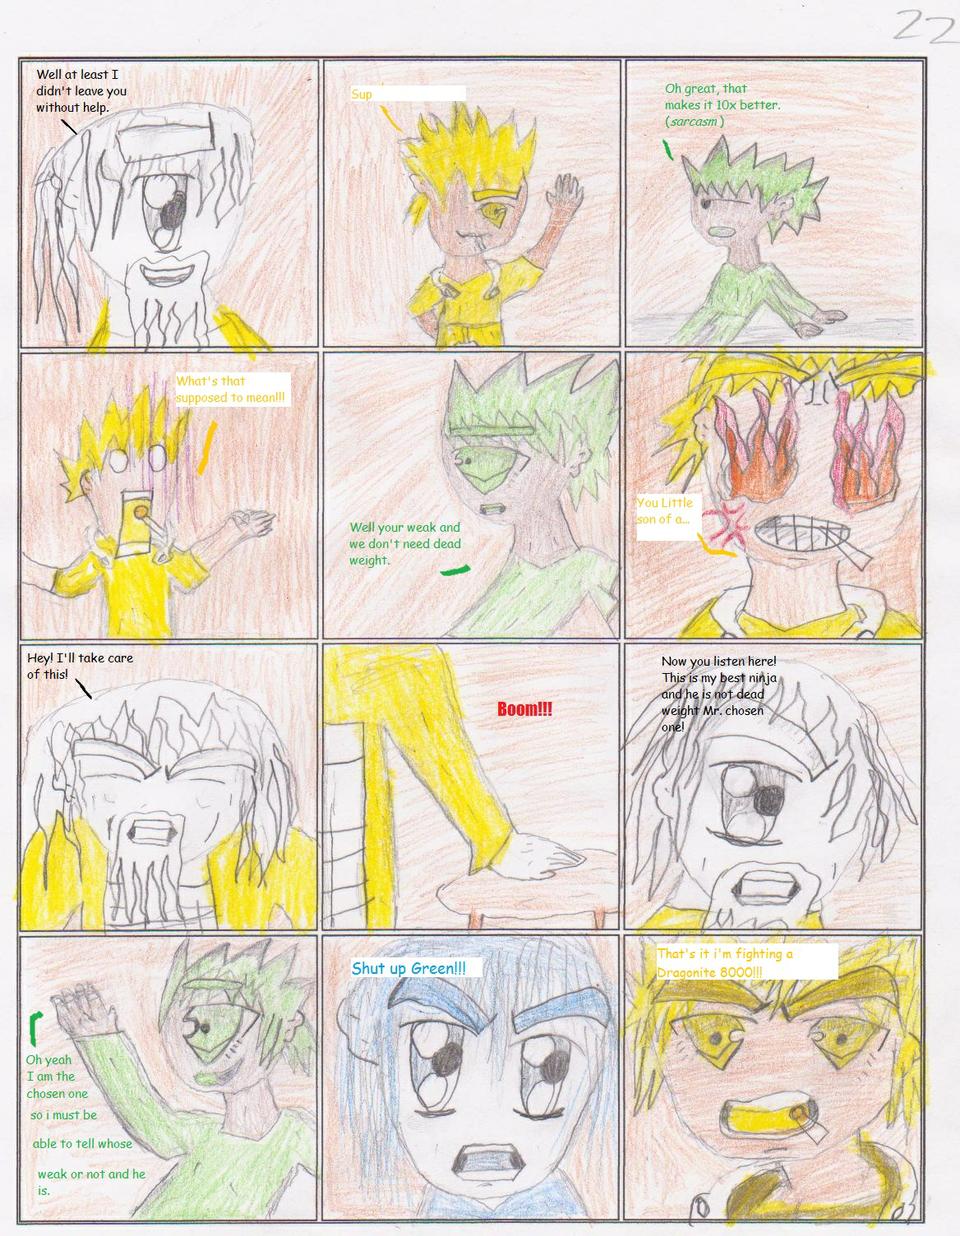 Green and Blue vol 1 issue 1 chapter 3 page 22